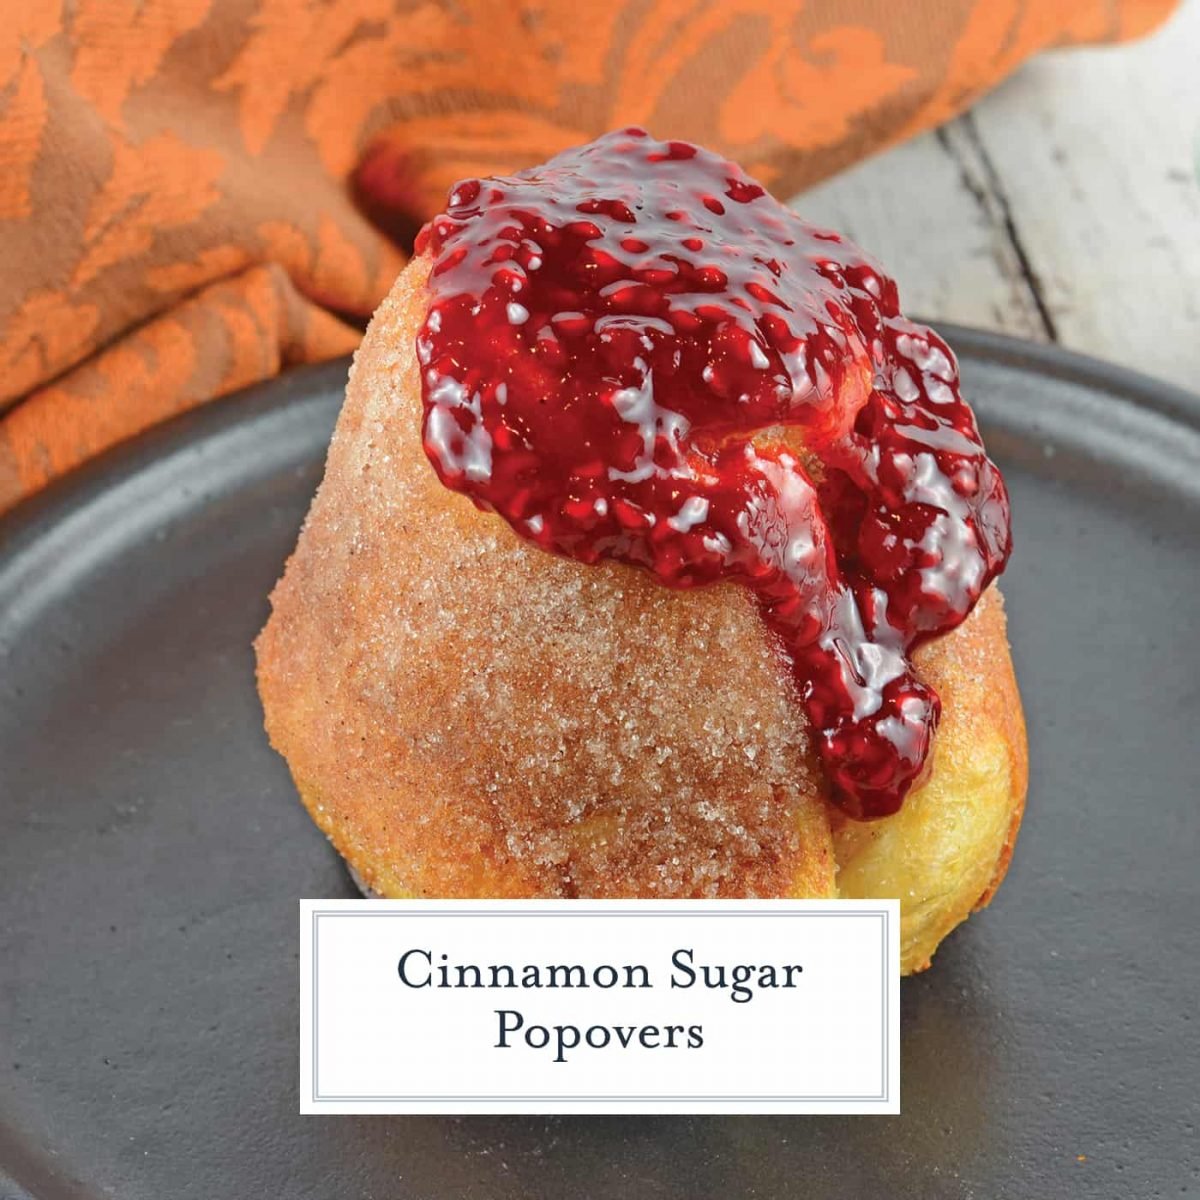 Cinnamon Sugar Popovers are easier to make than you think! A crispy outside and chewy inside coated with cinnamon and sugar, then drizzled in a fresh raspberry sauce. Perfect for a decadent breakfast or dessert. #popovers #howtomakepopovers www.savoryexperiments.com